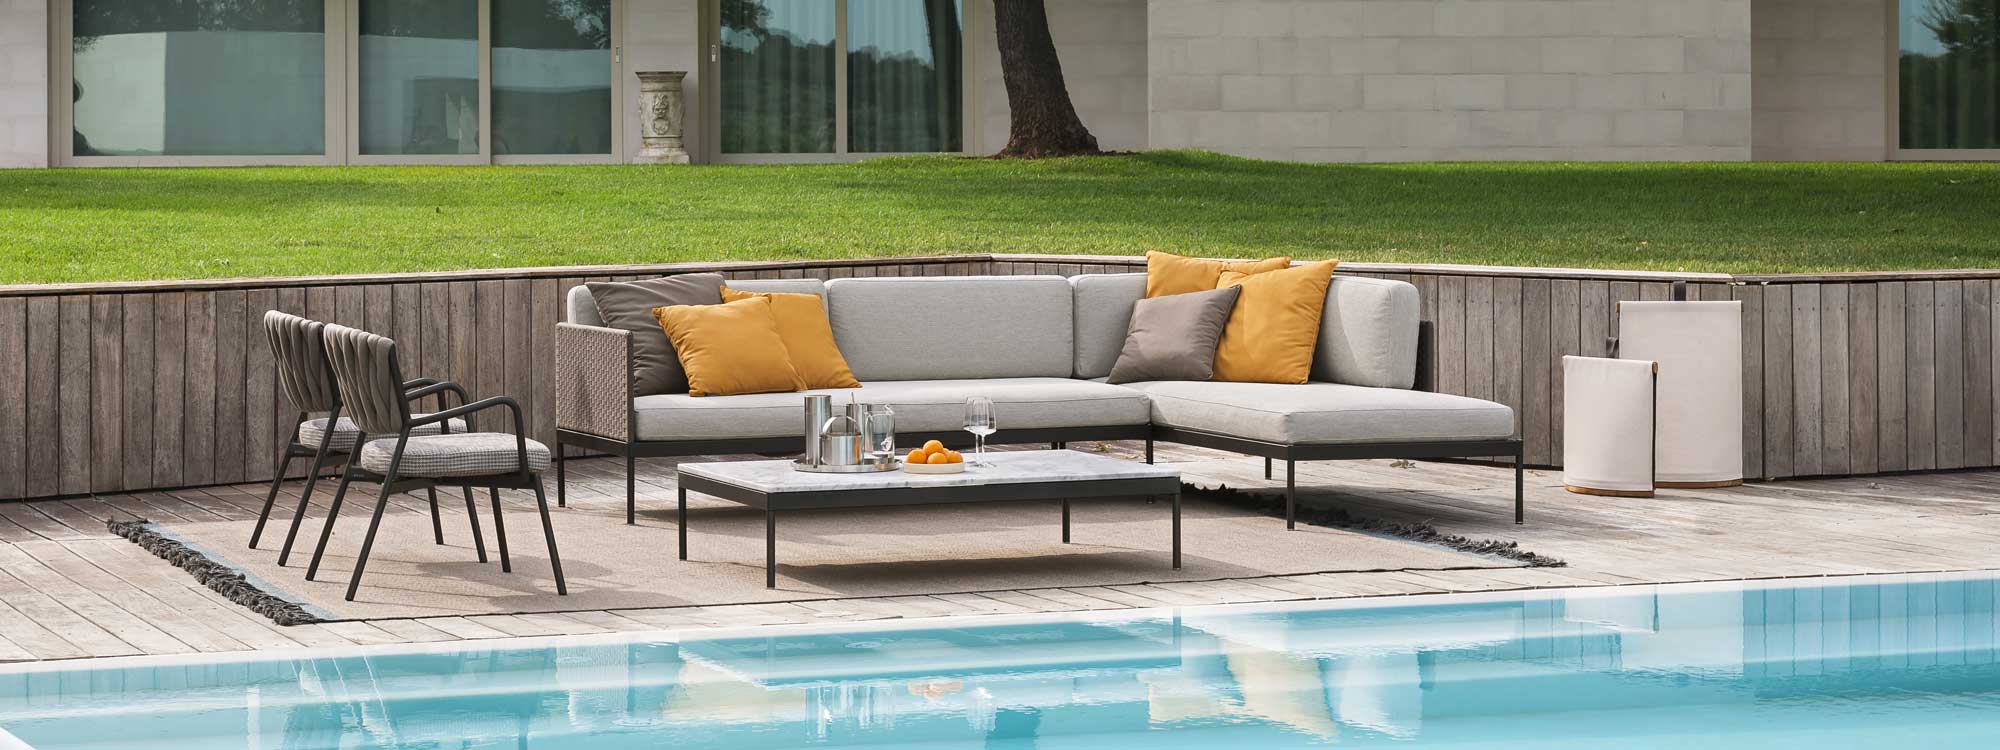 Image of Basket outdoor corner sofa and Piper chairs on sunken terrace with lawn and minimalist house in the background